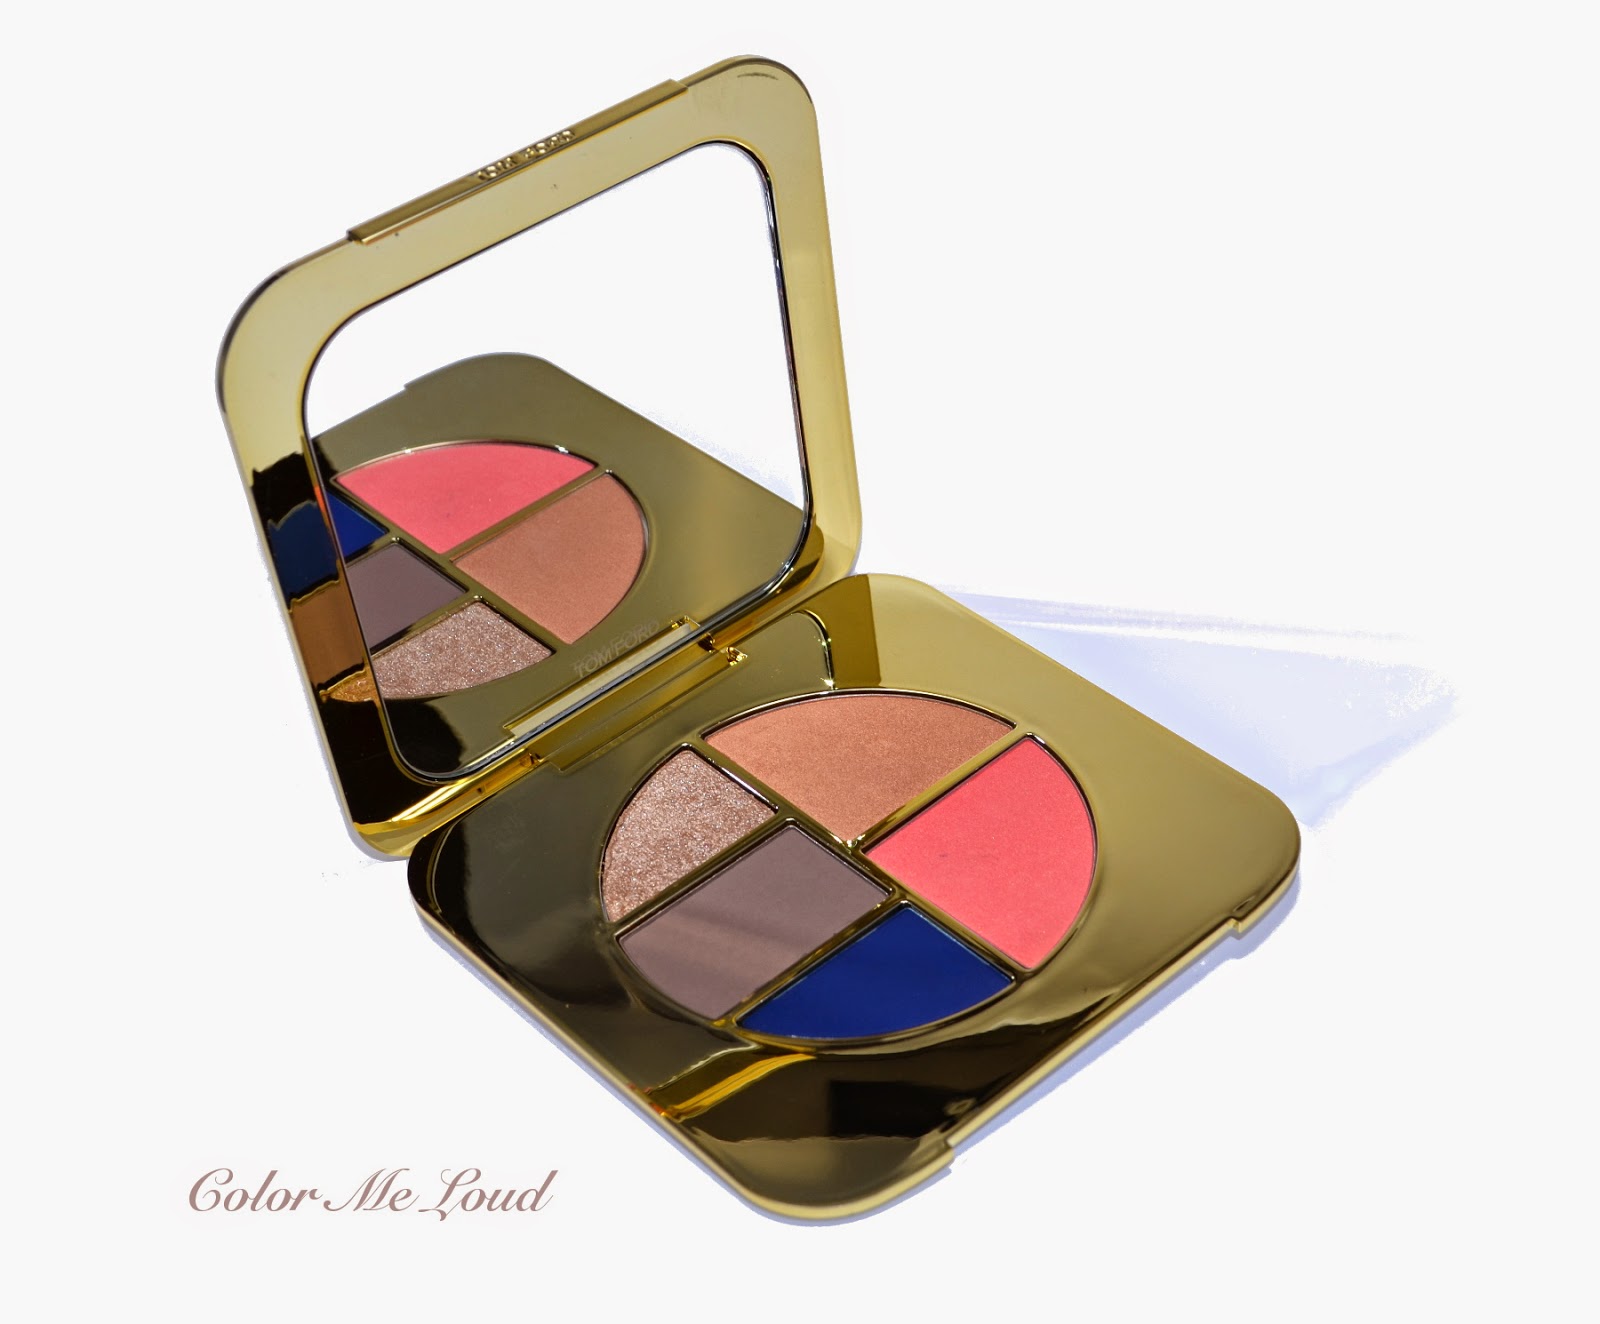 Tom Ford Eye and Cheek Compact Unabashed for Summer 2014, Review, Swatch, Comparison & FOTD